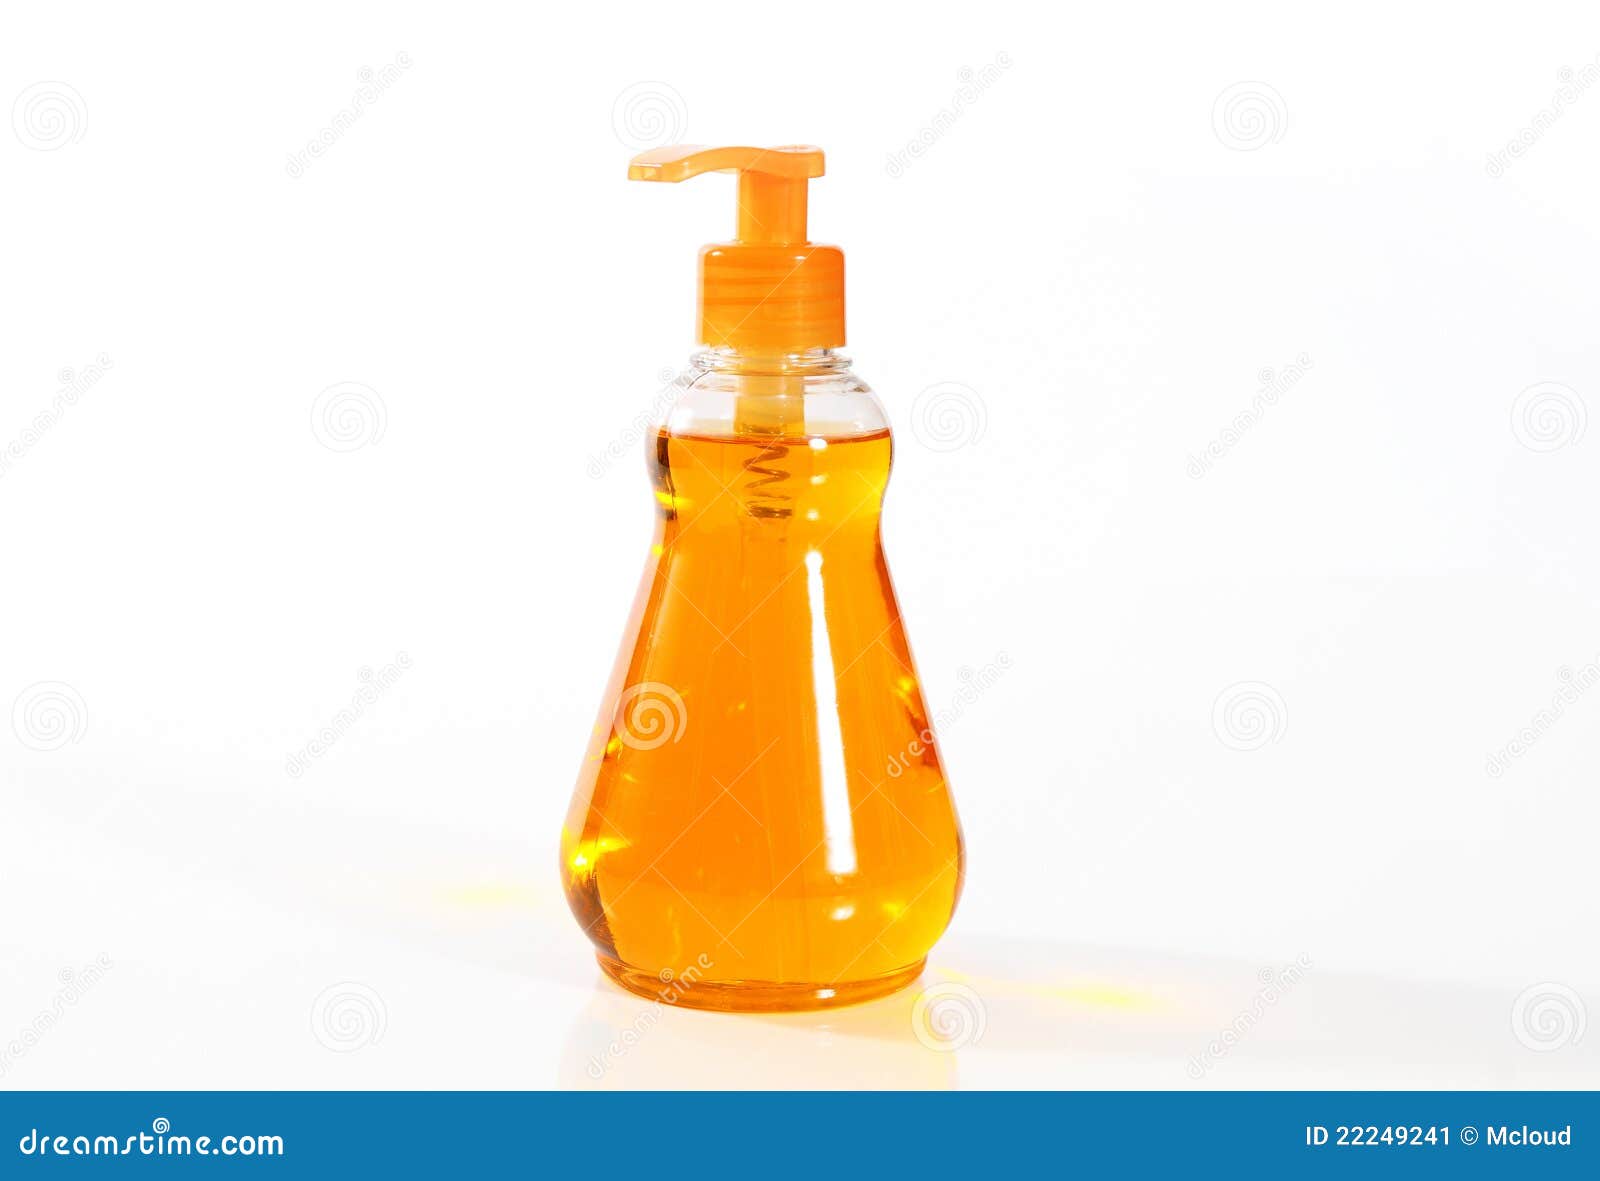 bottle with liquid soap